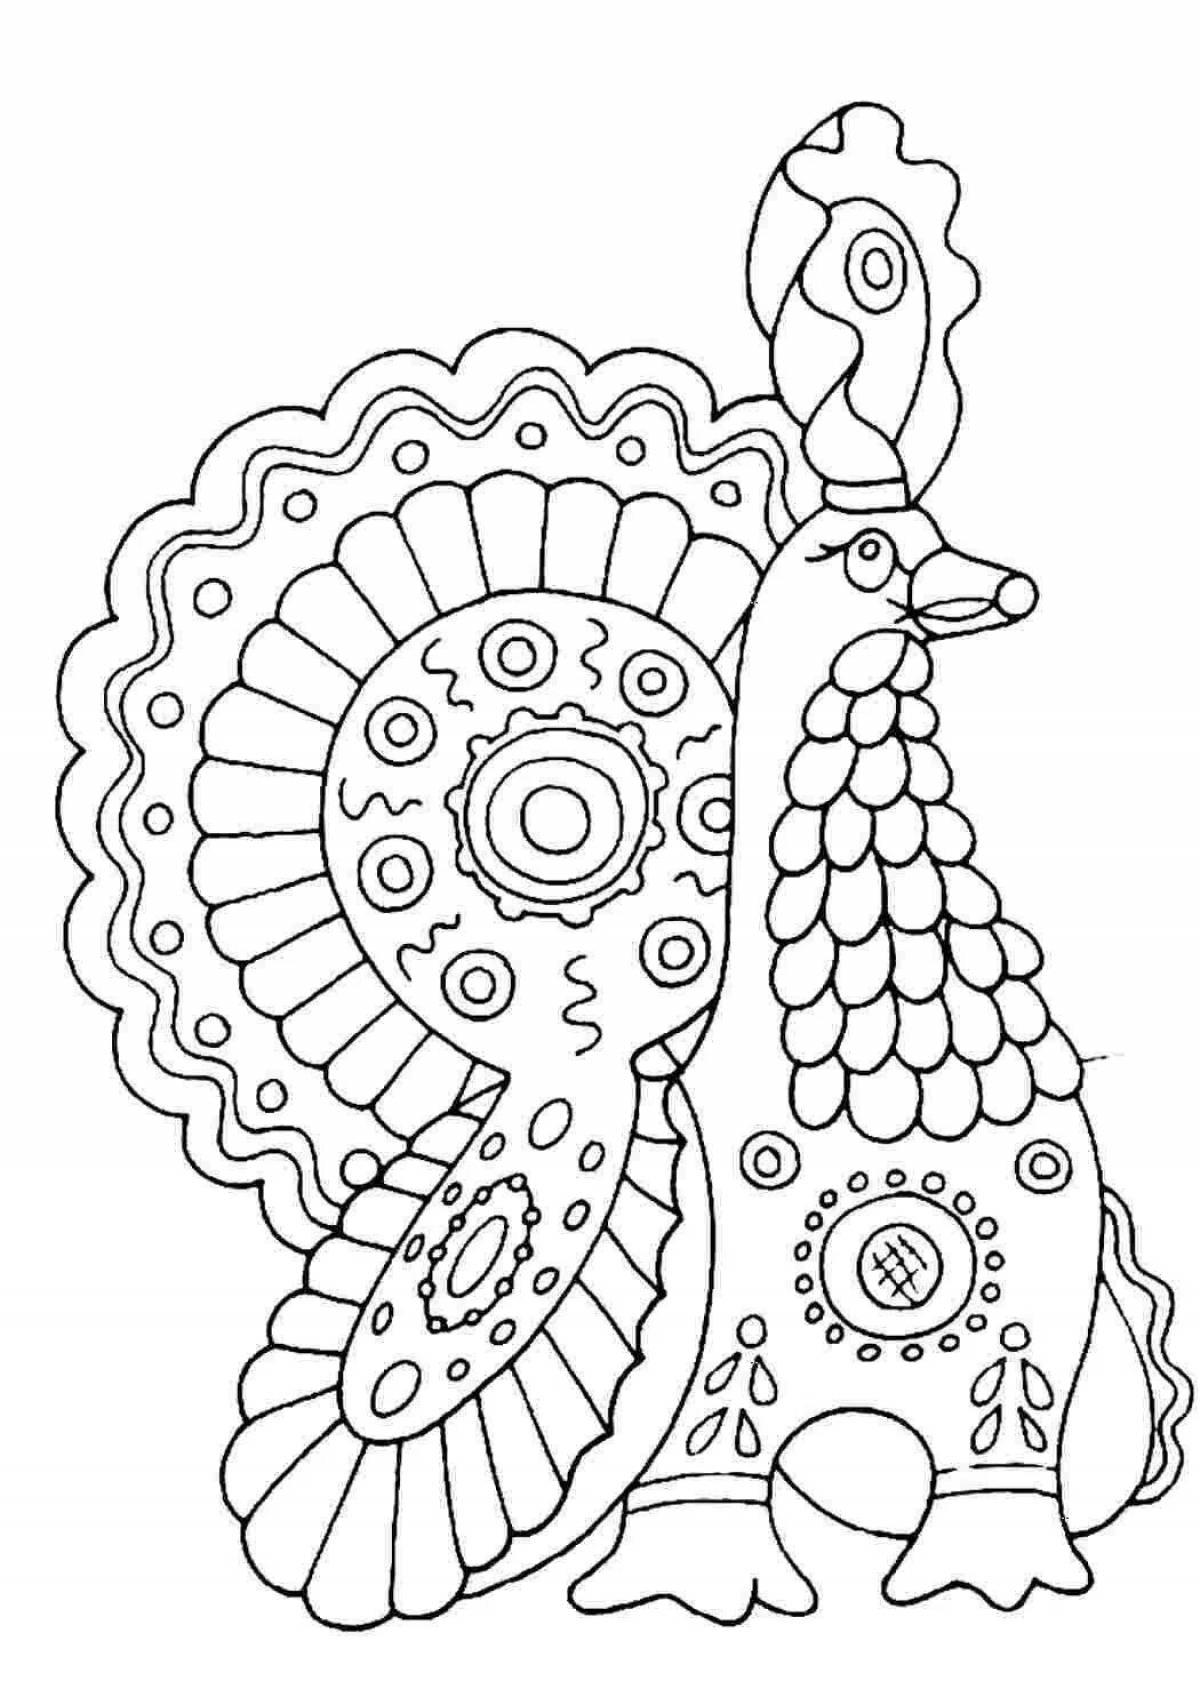 Exquisite Dymkovo turkey coloring for the little ones